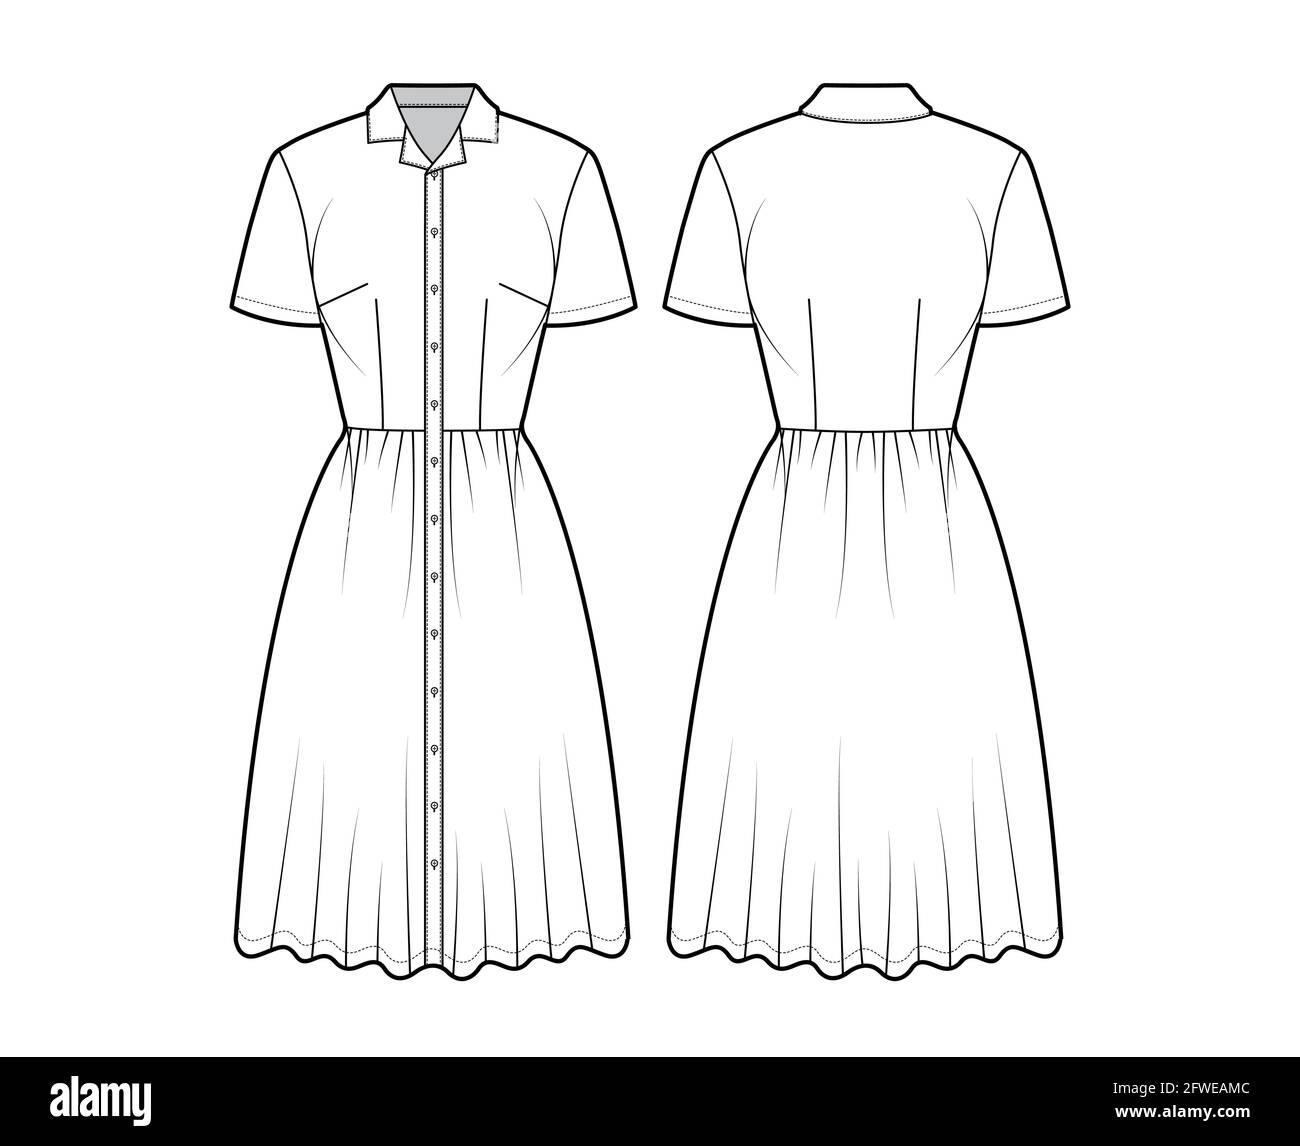 Dress shirt technical fashion illustration with short sleeves, camp collar, fitted body, knee length full skirt, button closure. Flat apparel front, back, white color style. Women, men unisex mockup Stock Vector